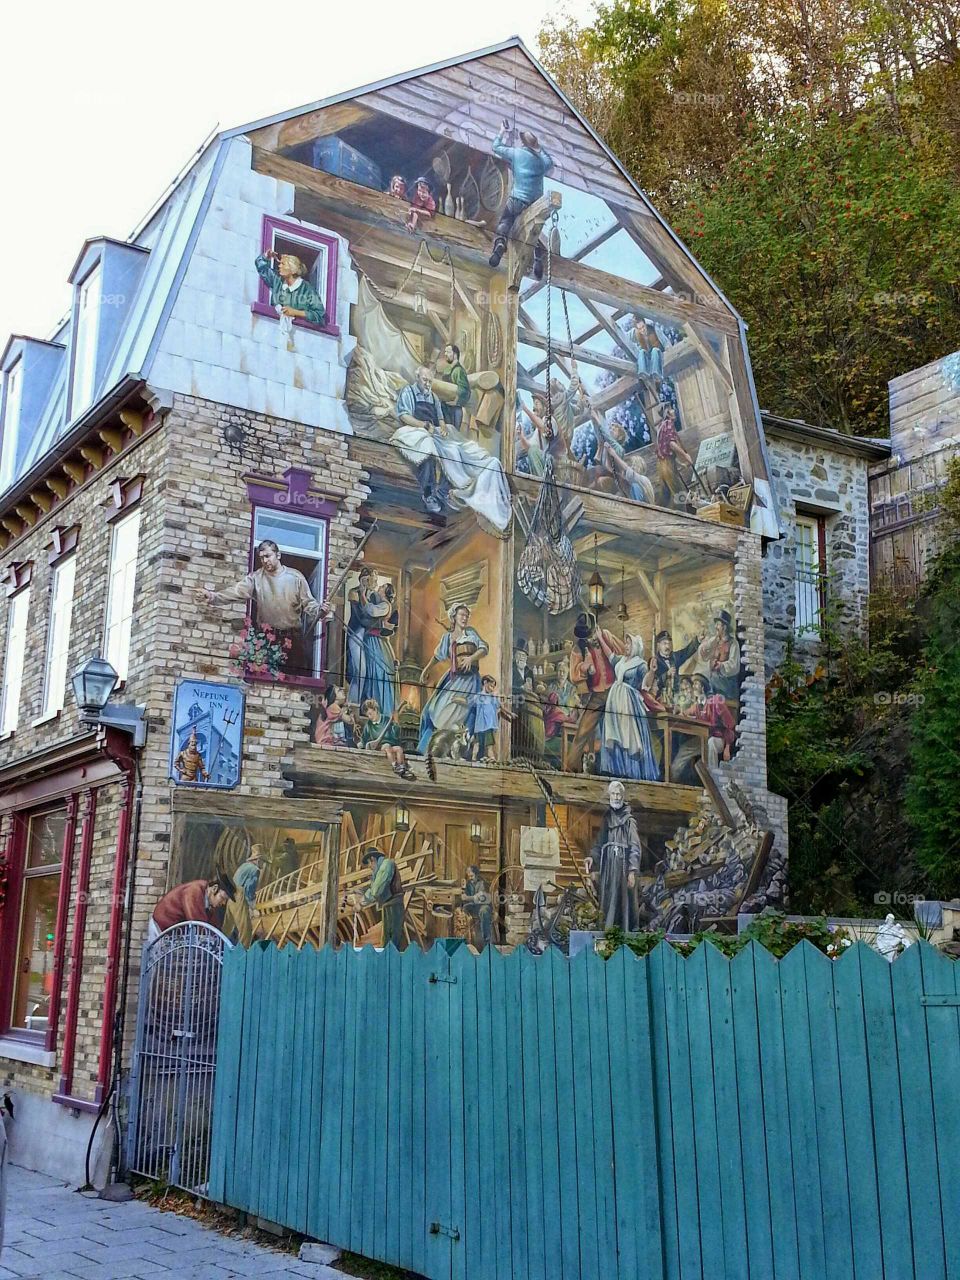 A mural on a brick wall in Old Quebec